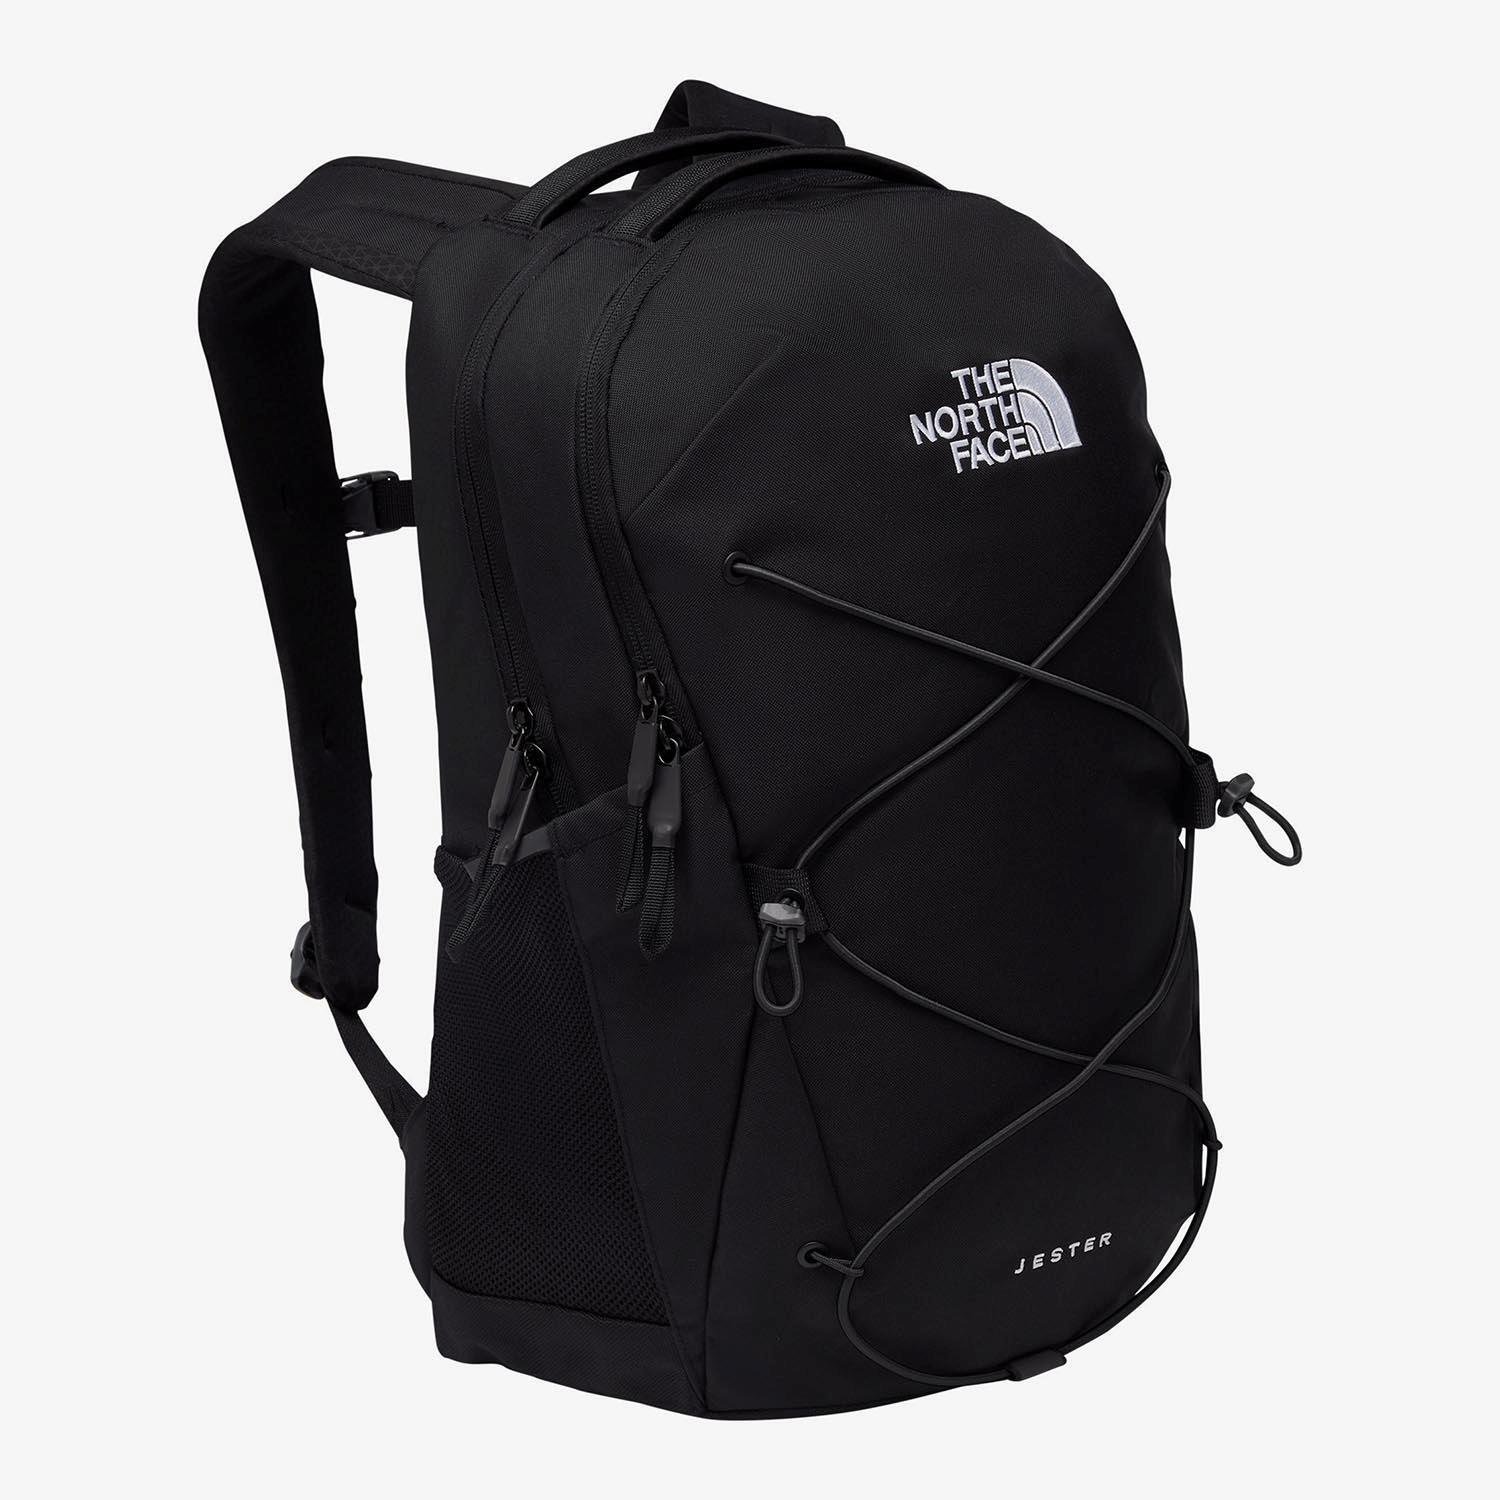 The North Face The north face jester rugzak zwart heren